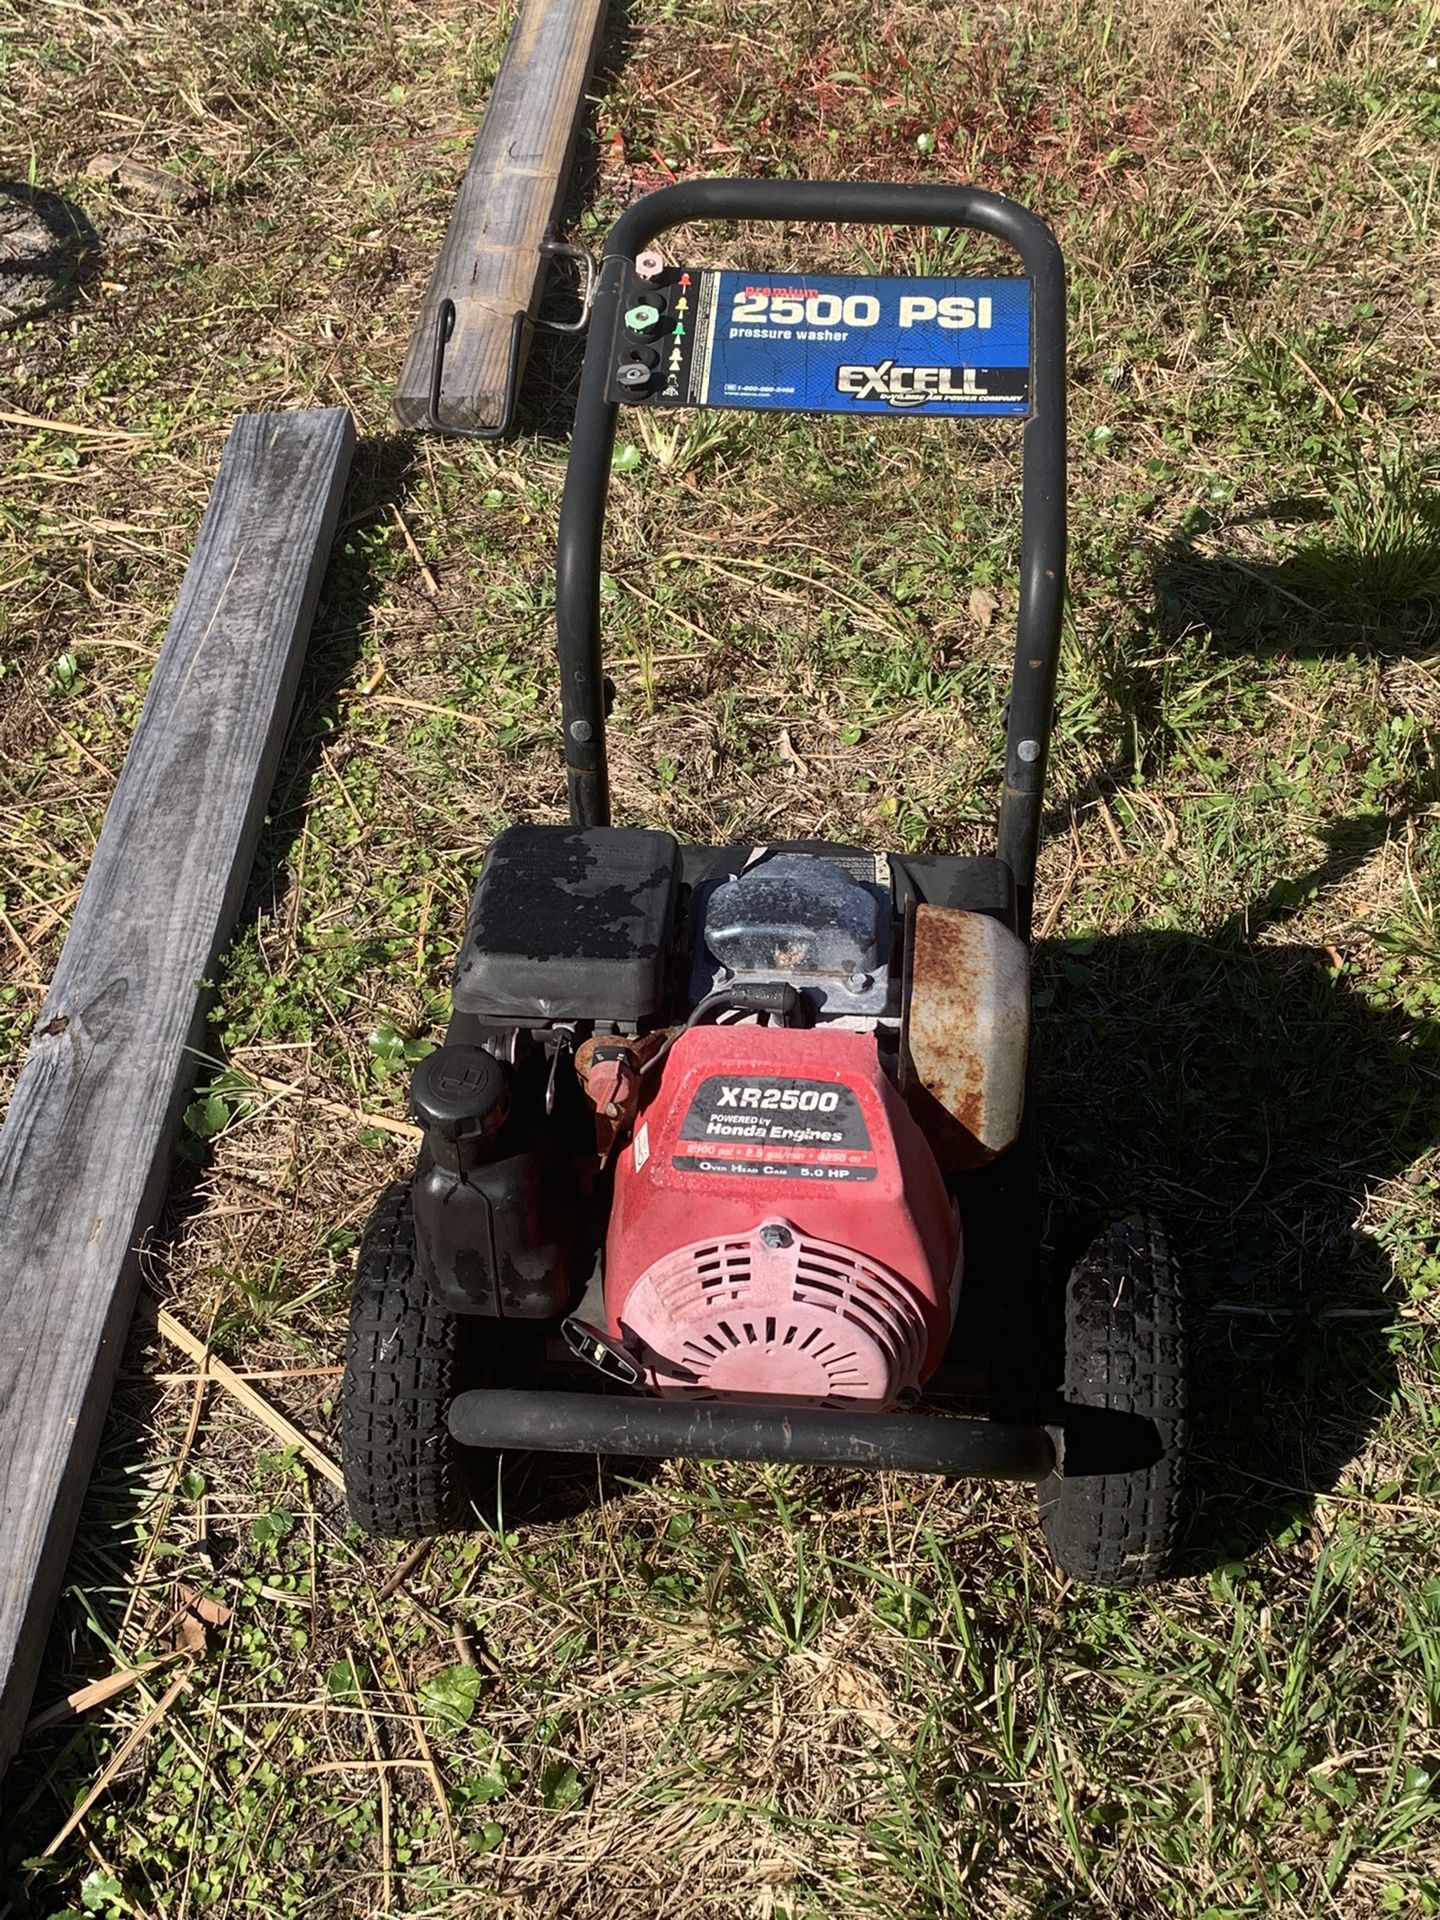 Ex-Cell 2500 Psi Pressure Washer # 2